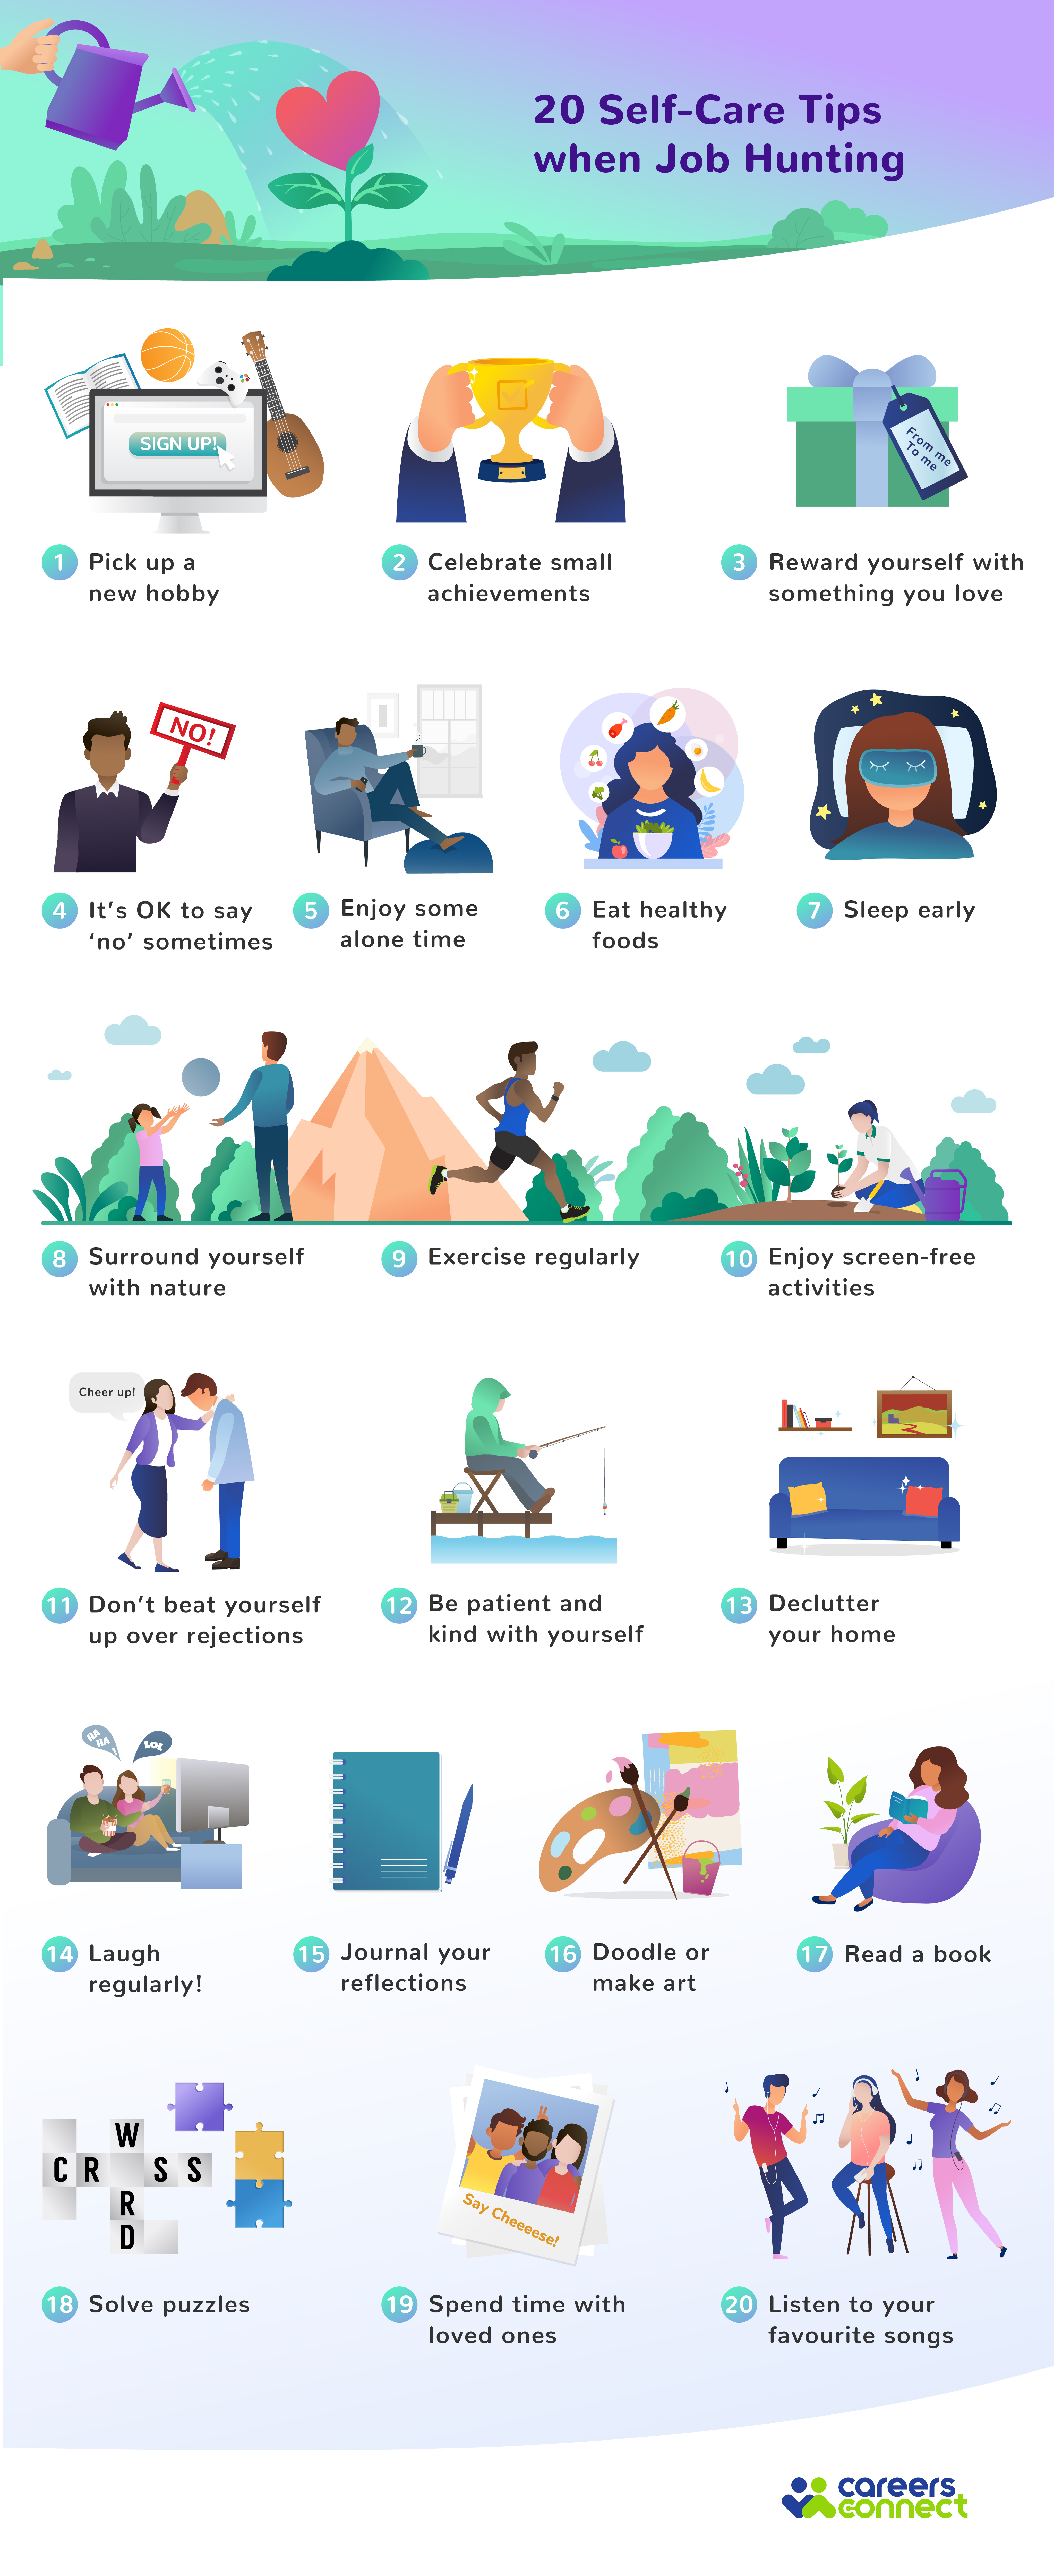 Self-care tips when job hunting infographic